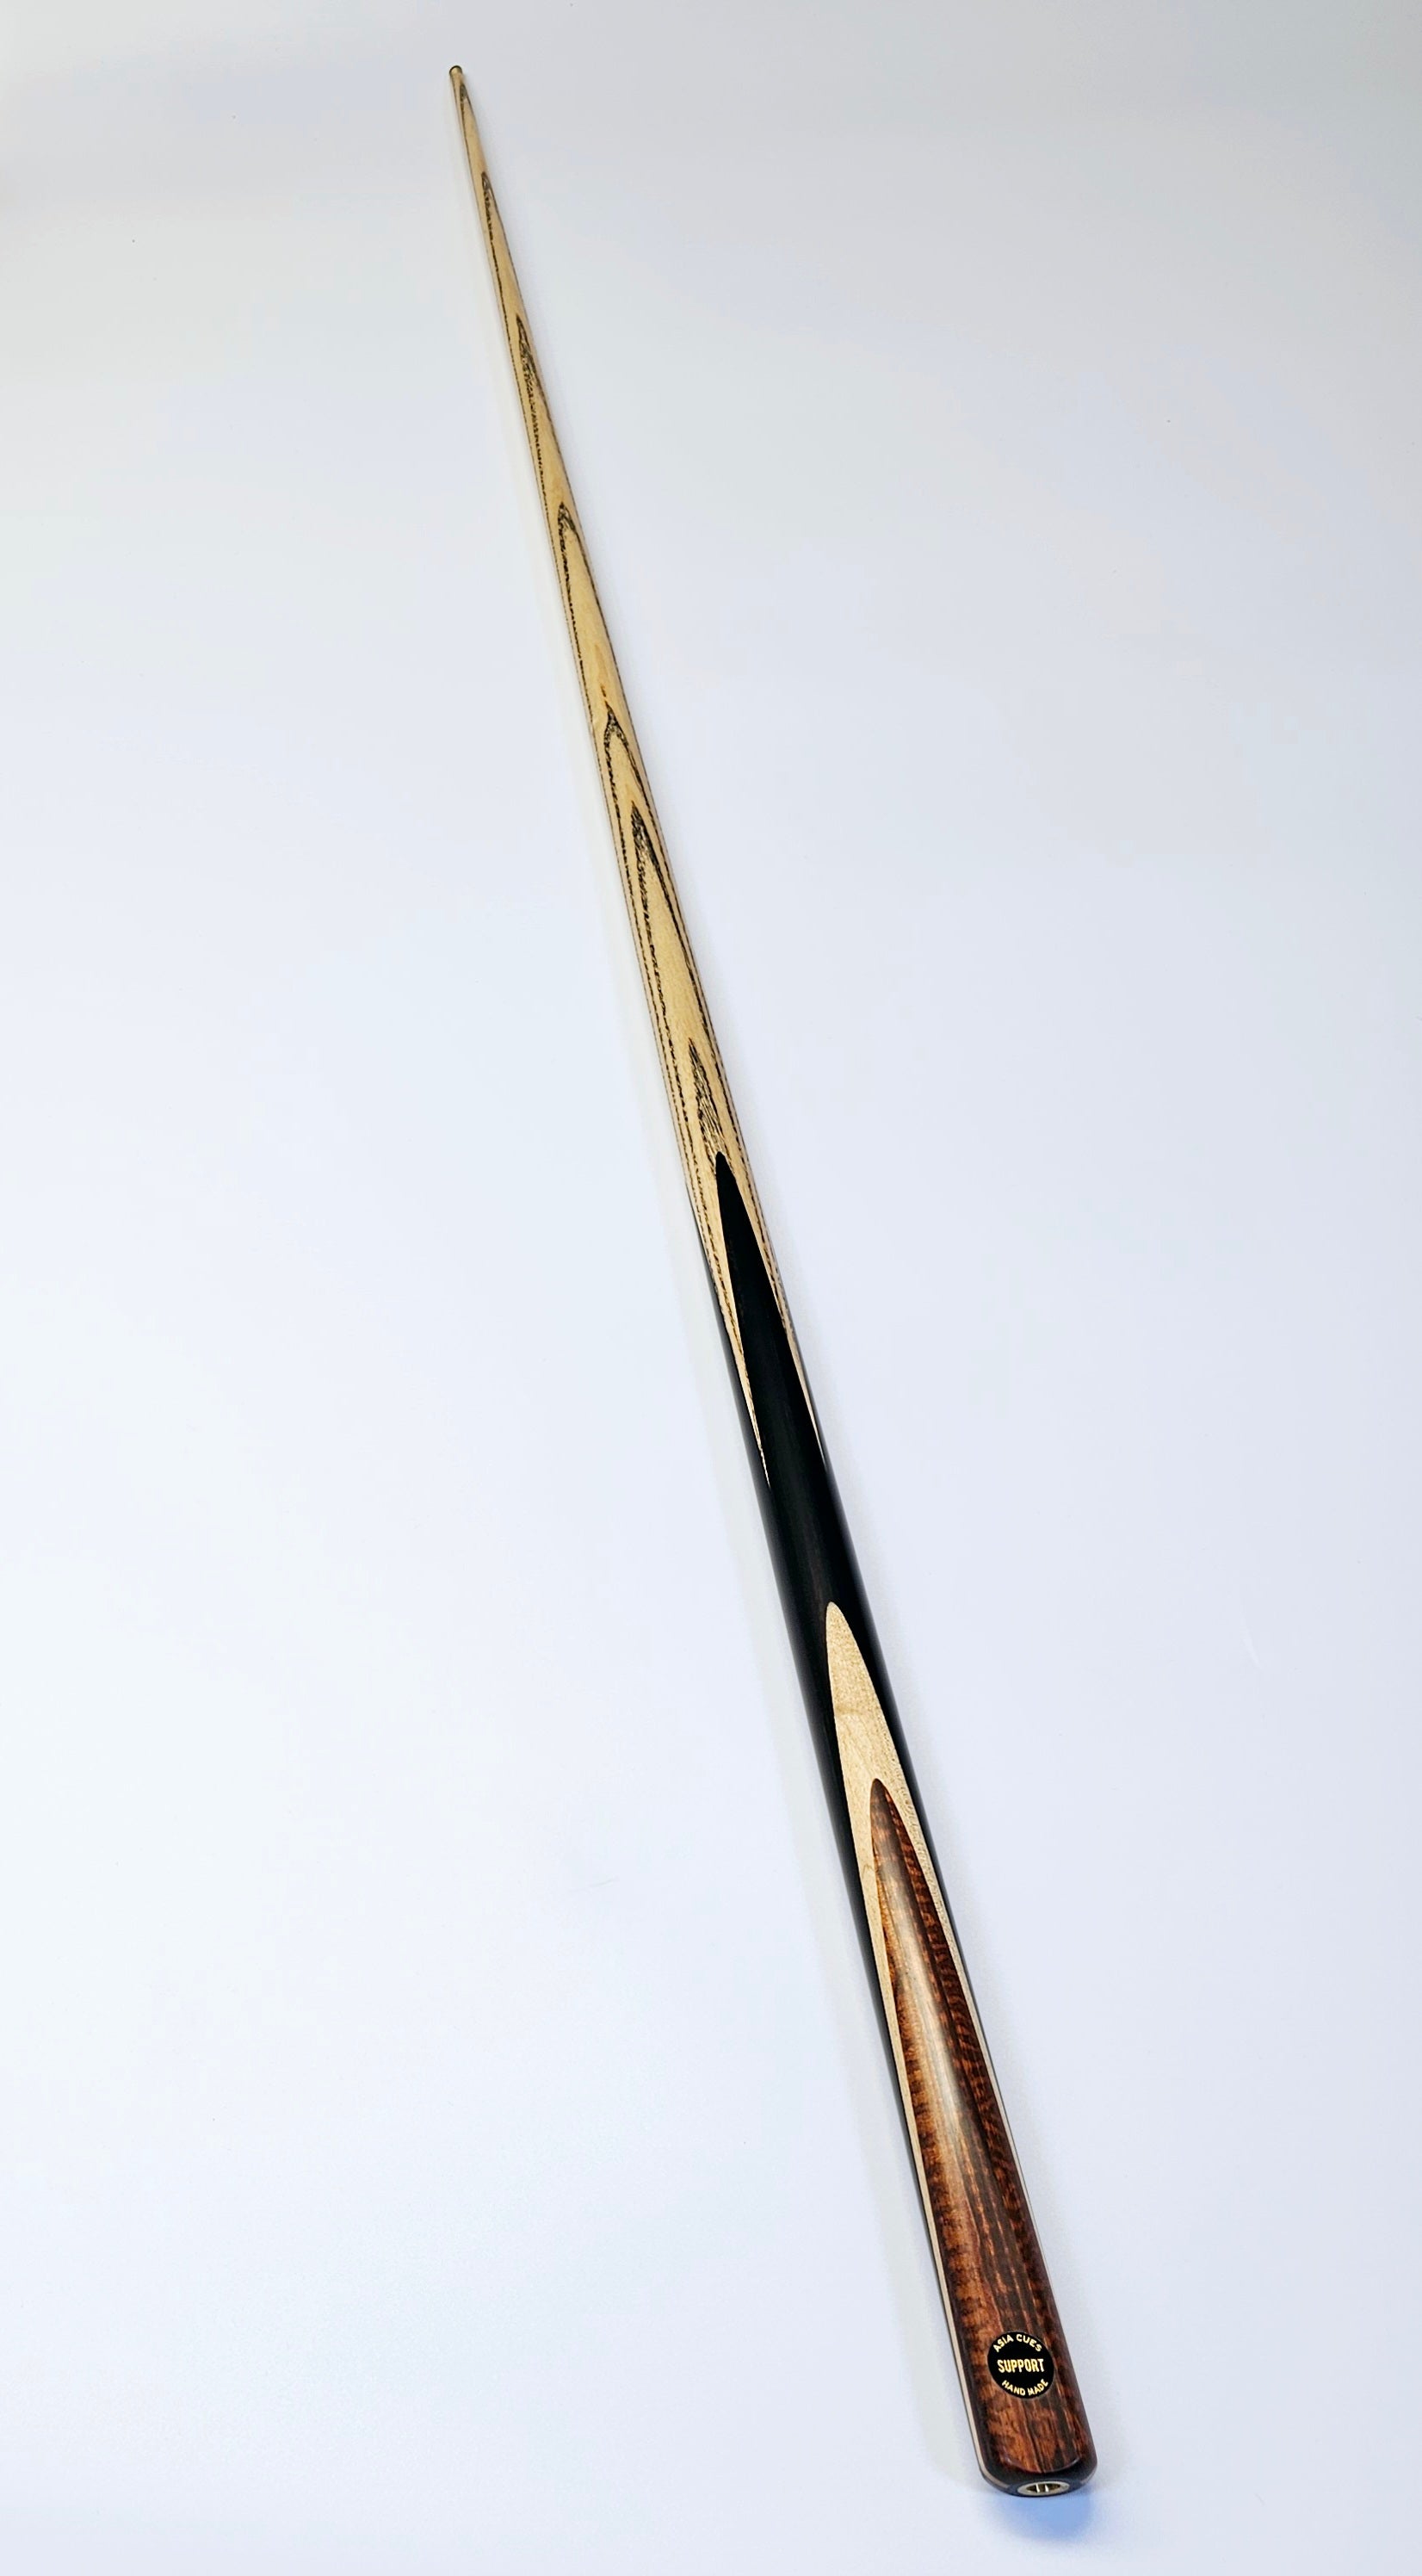 Asia Cues Support - One Piece Snooker Cue 9.5mm Tip, 17.6oz, 58"